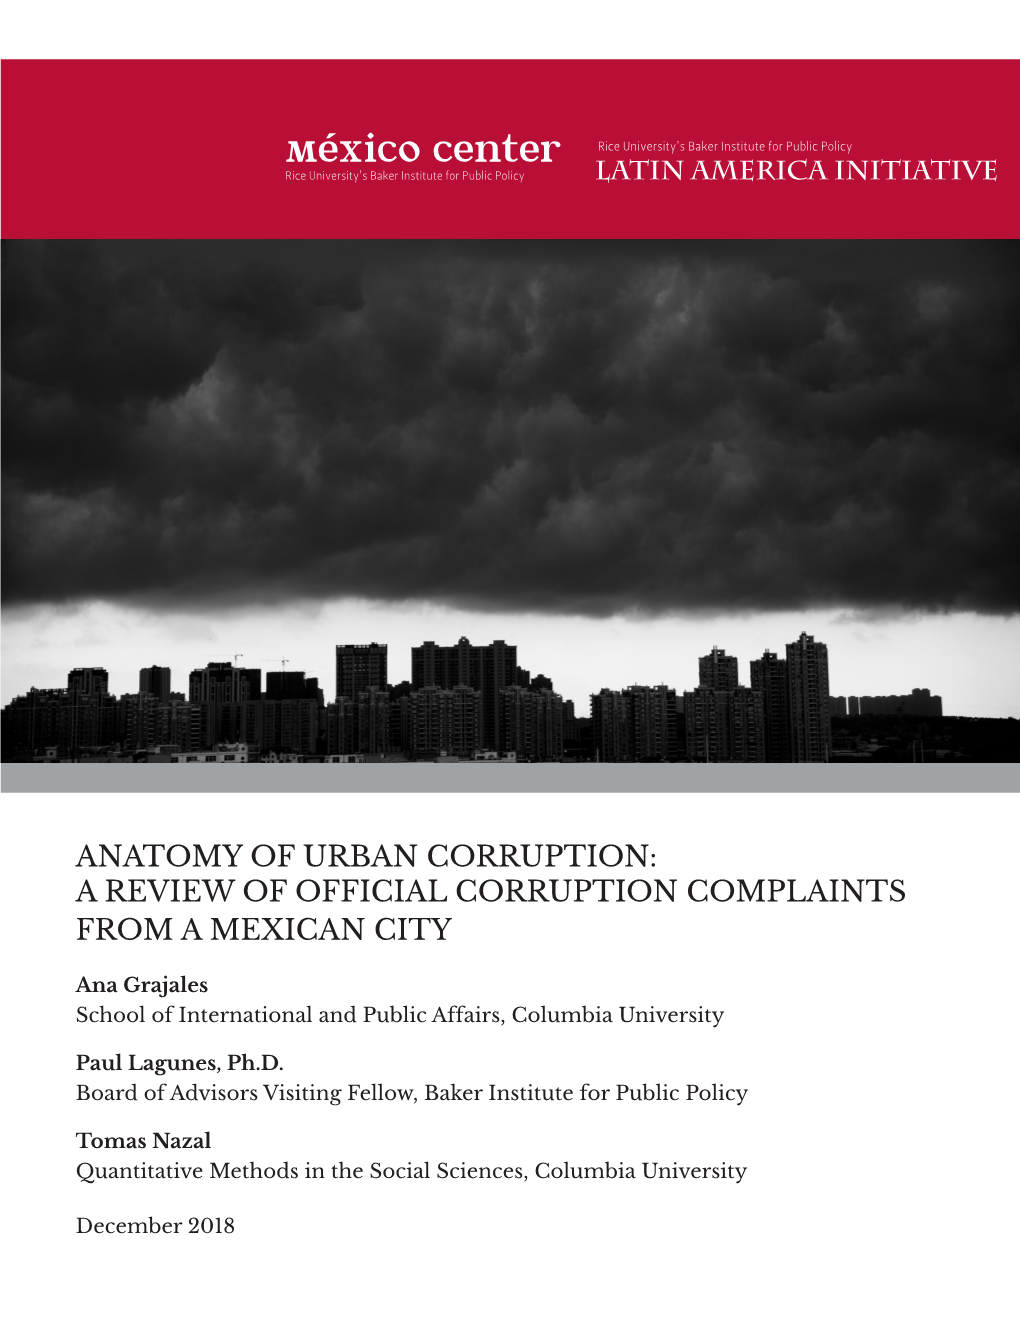 A Review of Official Corruption Complaints from a Mexican City